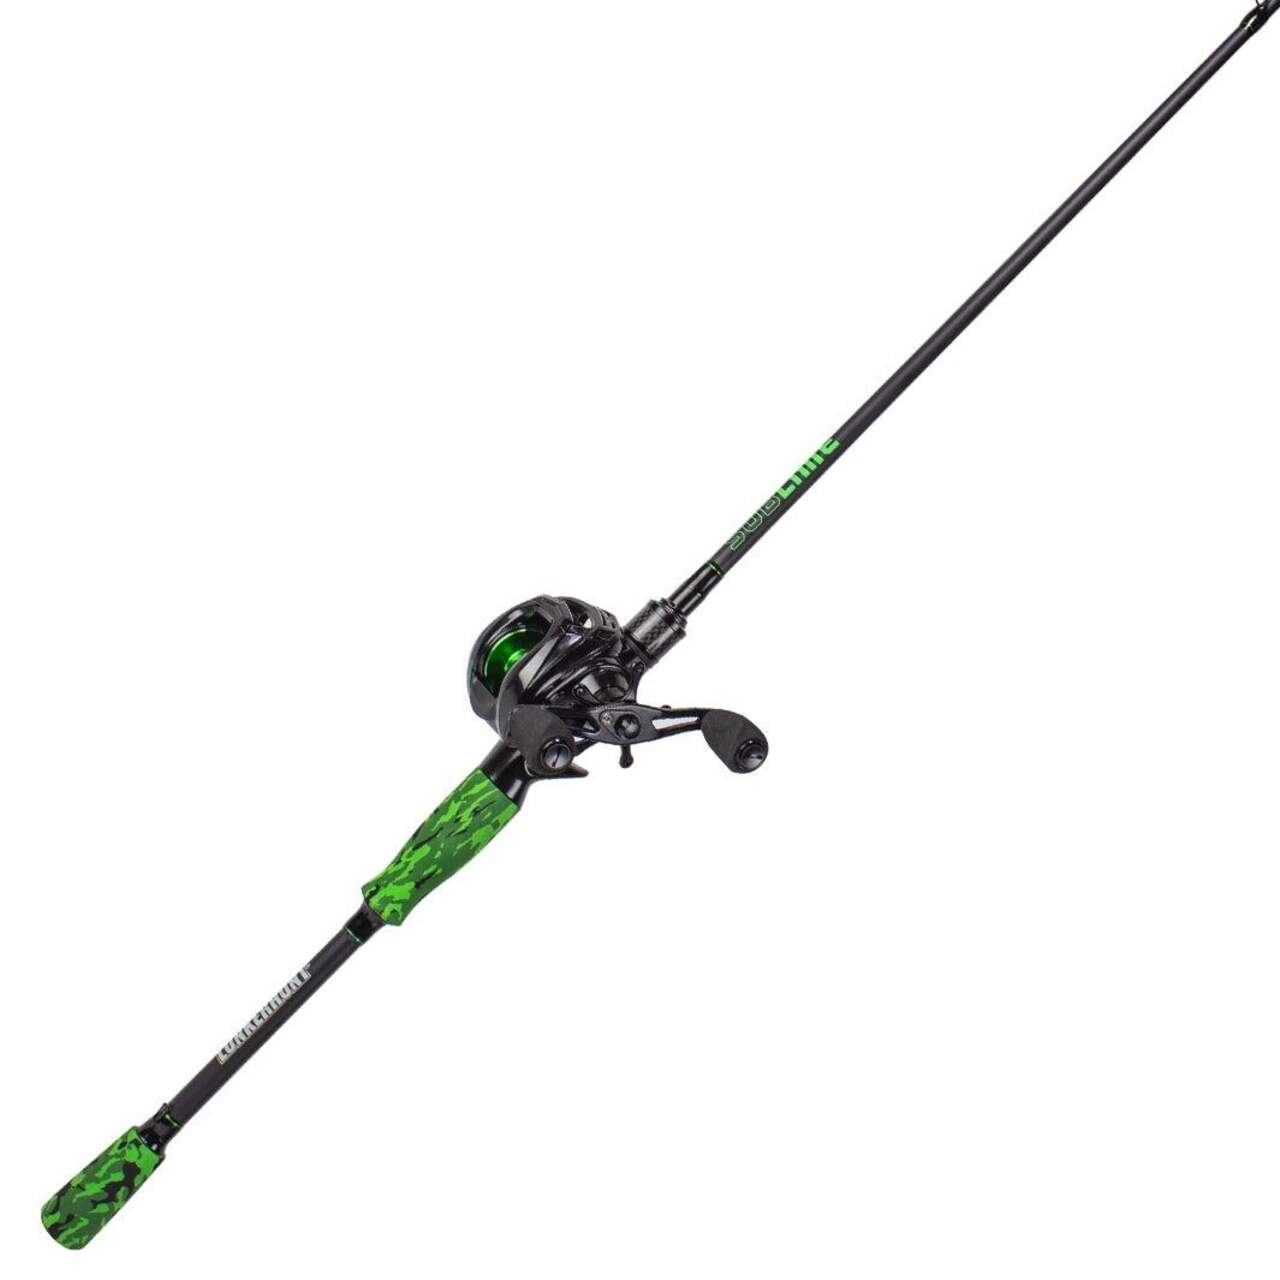 PAW Patrol II Spincast Fishing Rod and Reel Combo, Pre-Spooled, 29.5-in